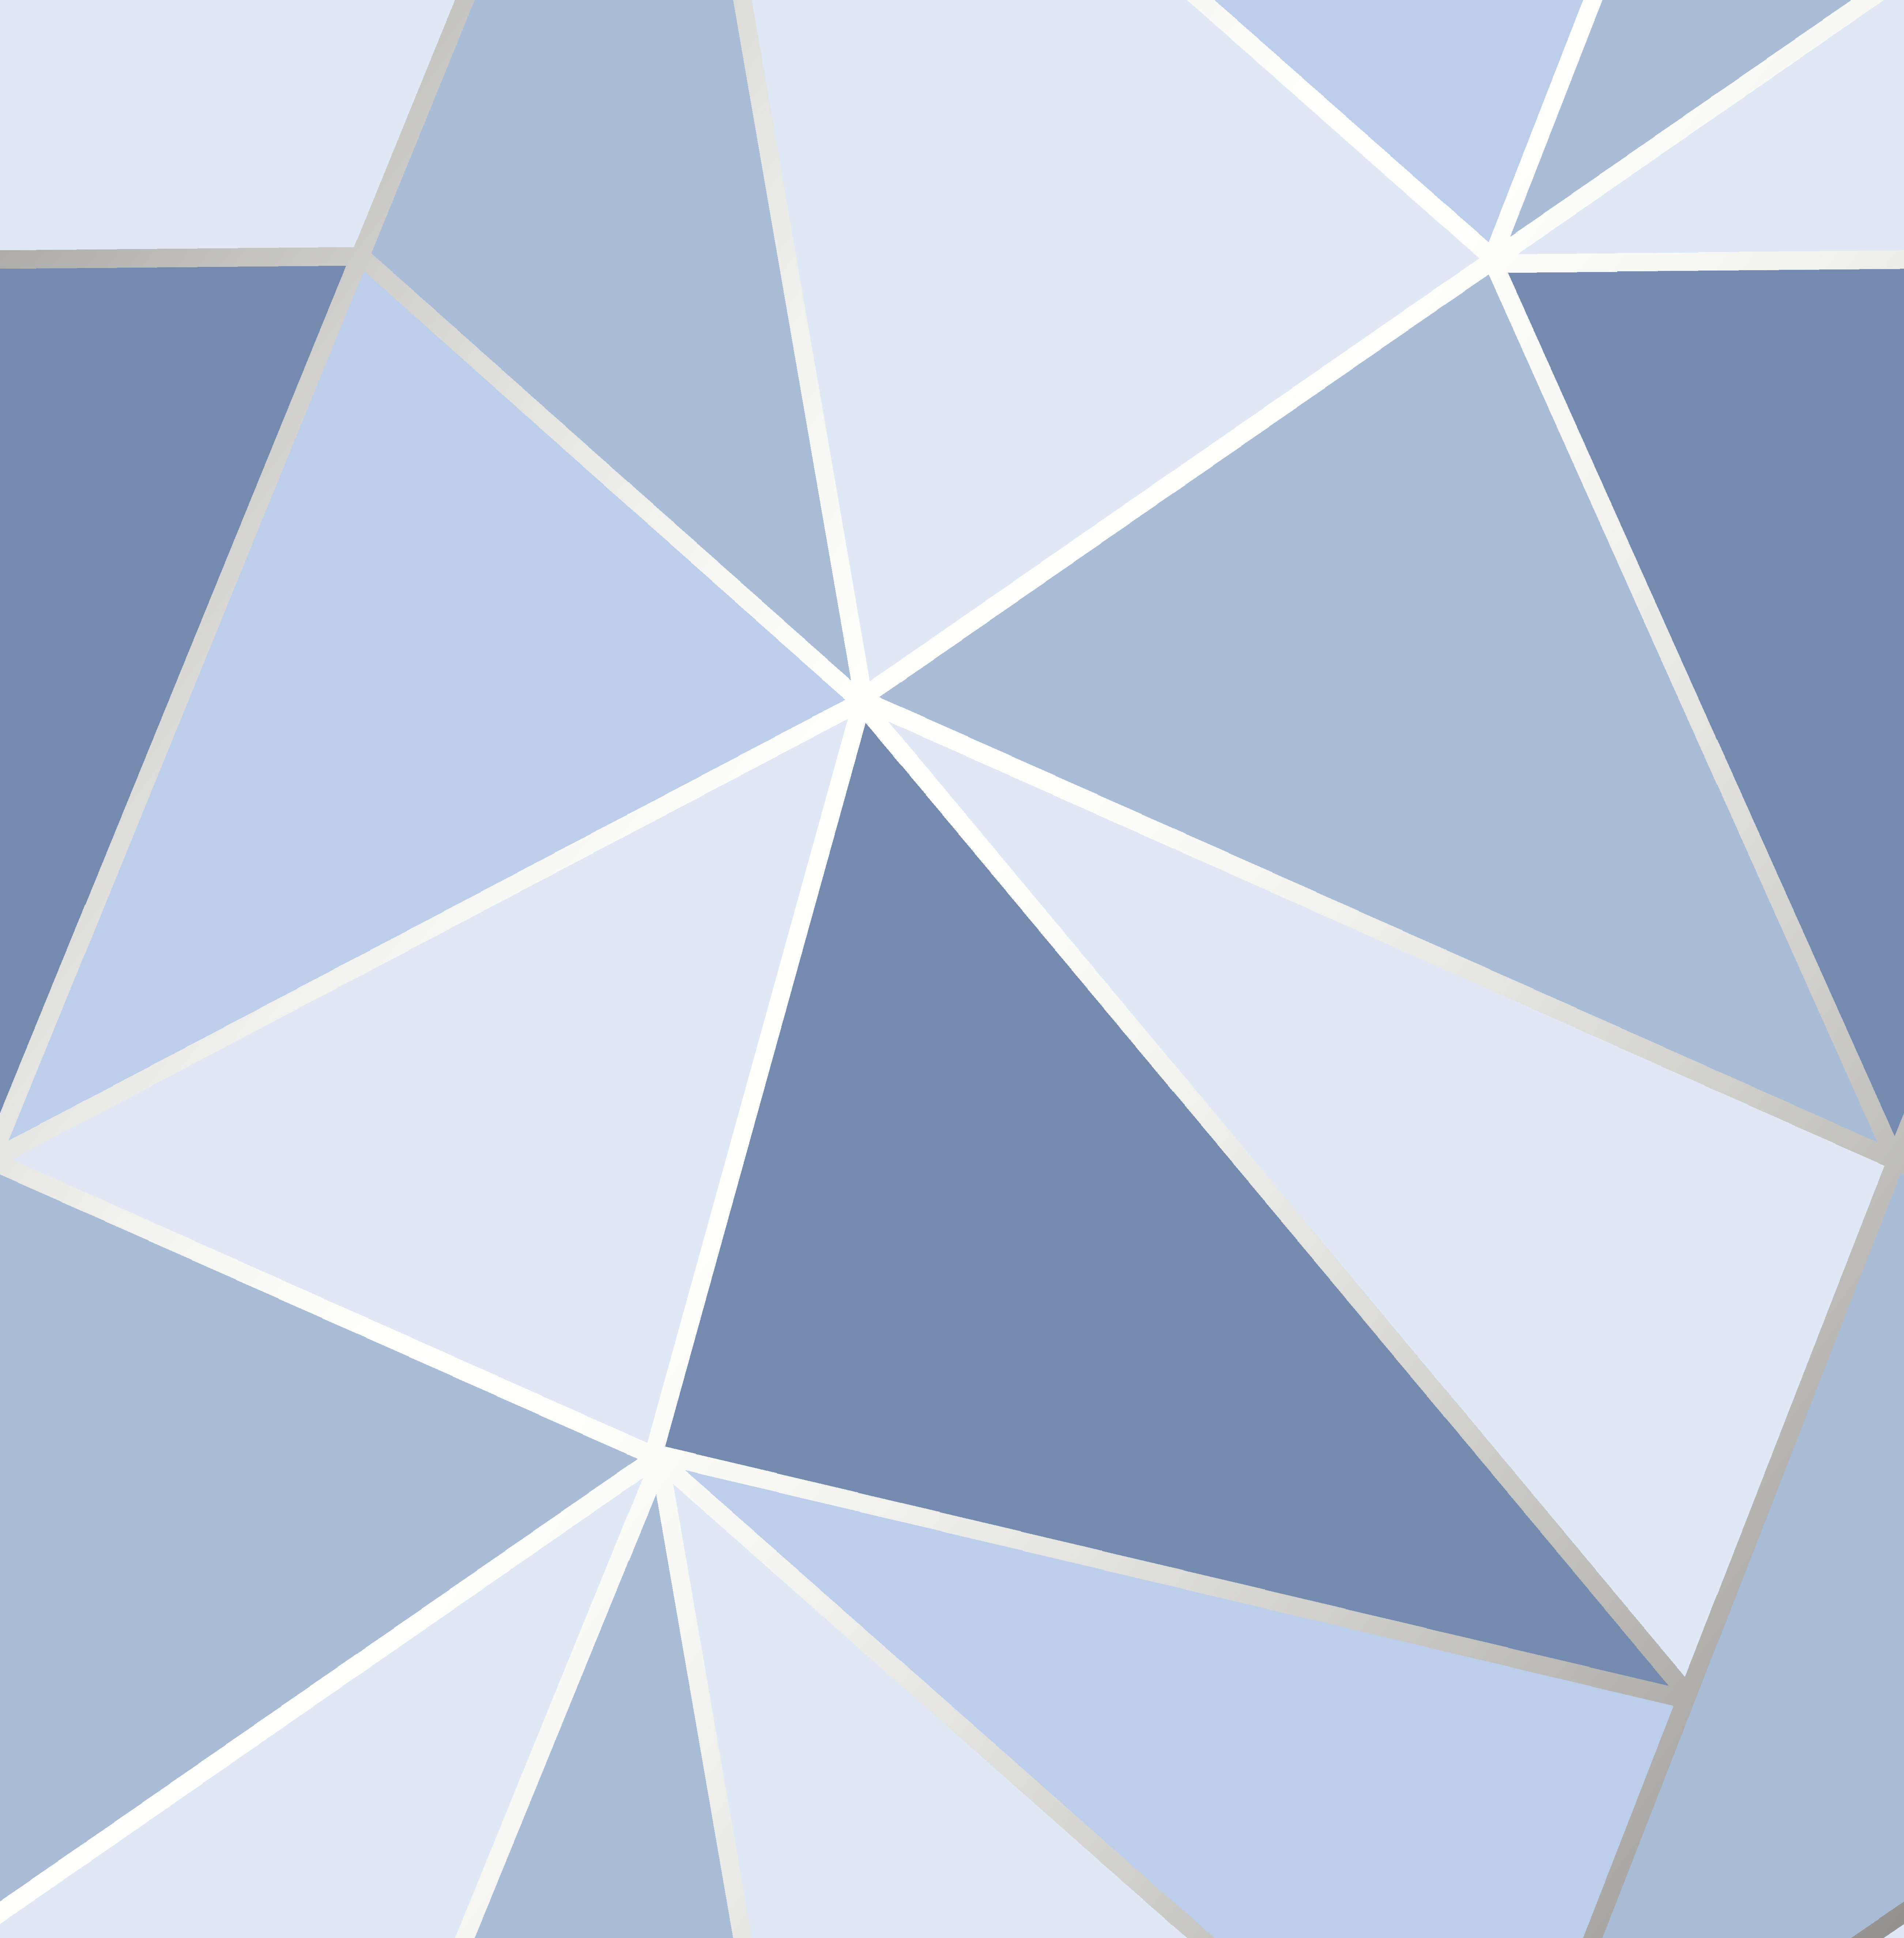 Details About Geometric Wallpaper 3d Apex Triangle - Blue And Gold Geometric , HD Wallpaper & Backgrounds